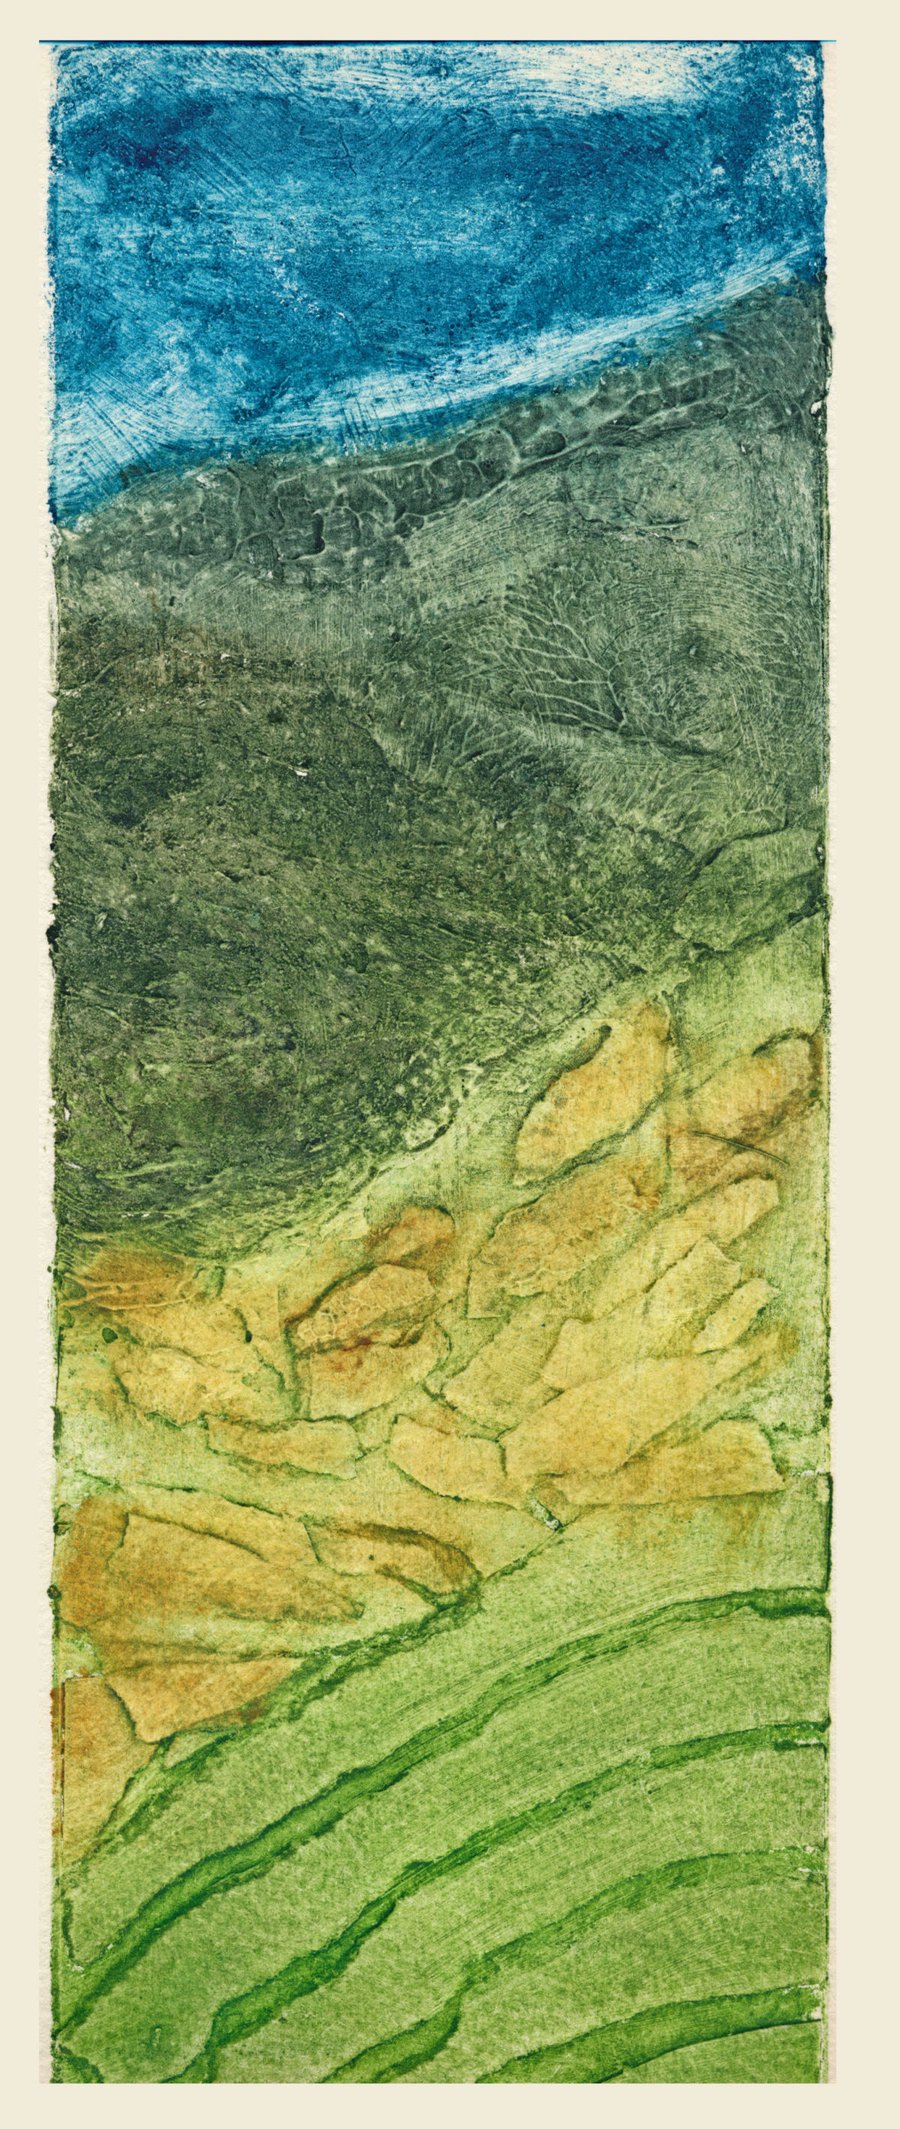 Transect II - limited edition collagraph print